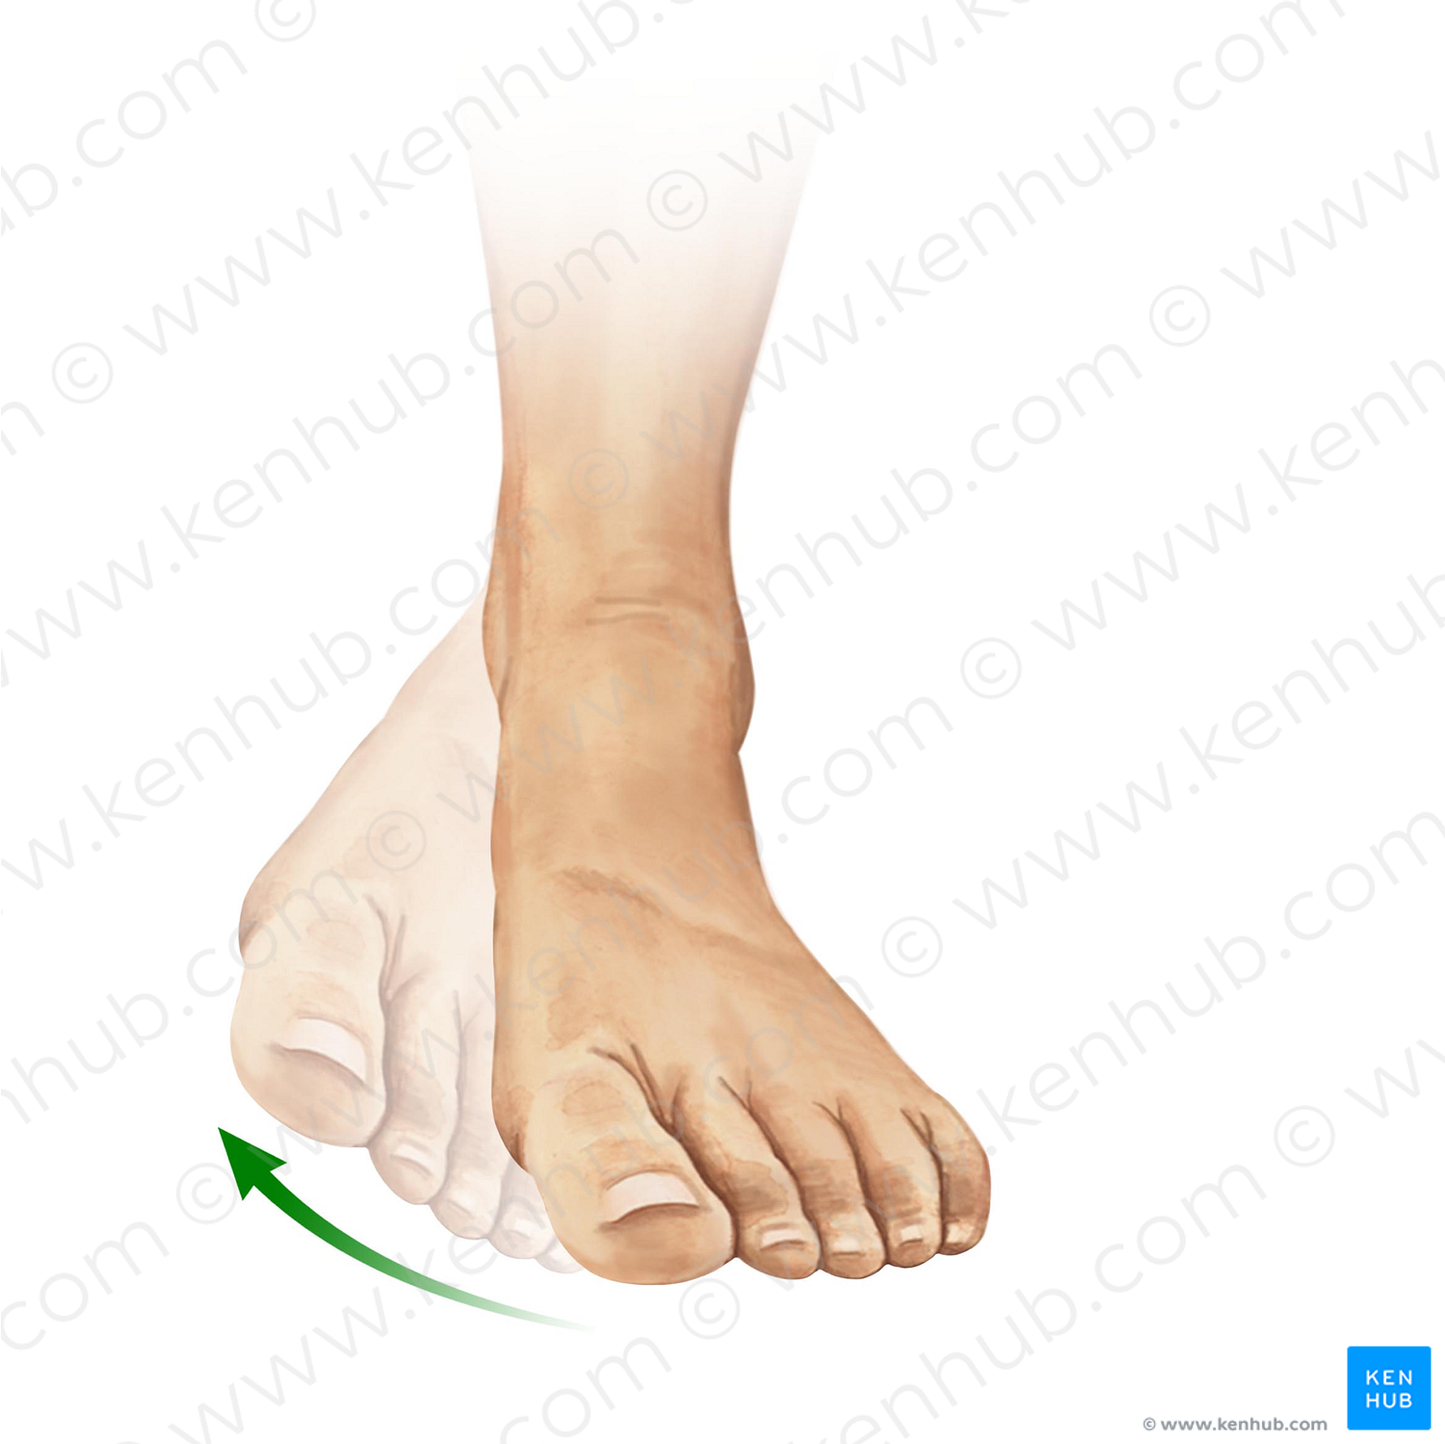 Inversion of foot (#11022)